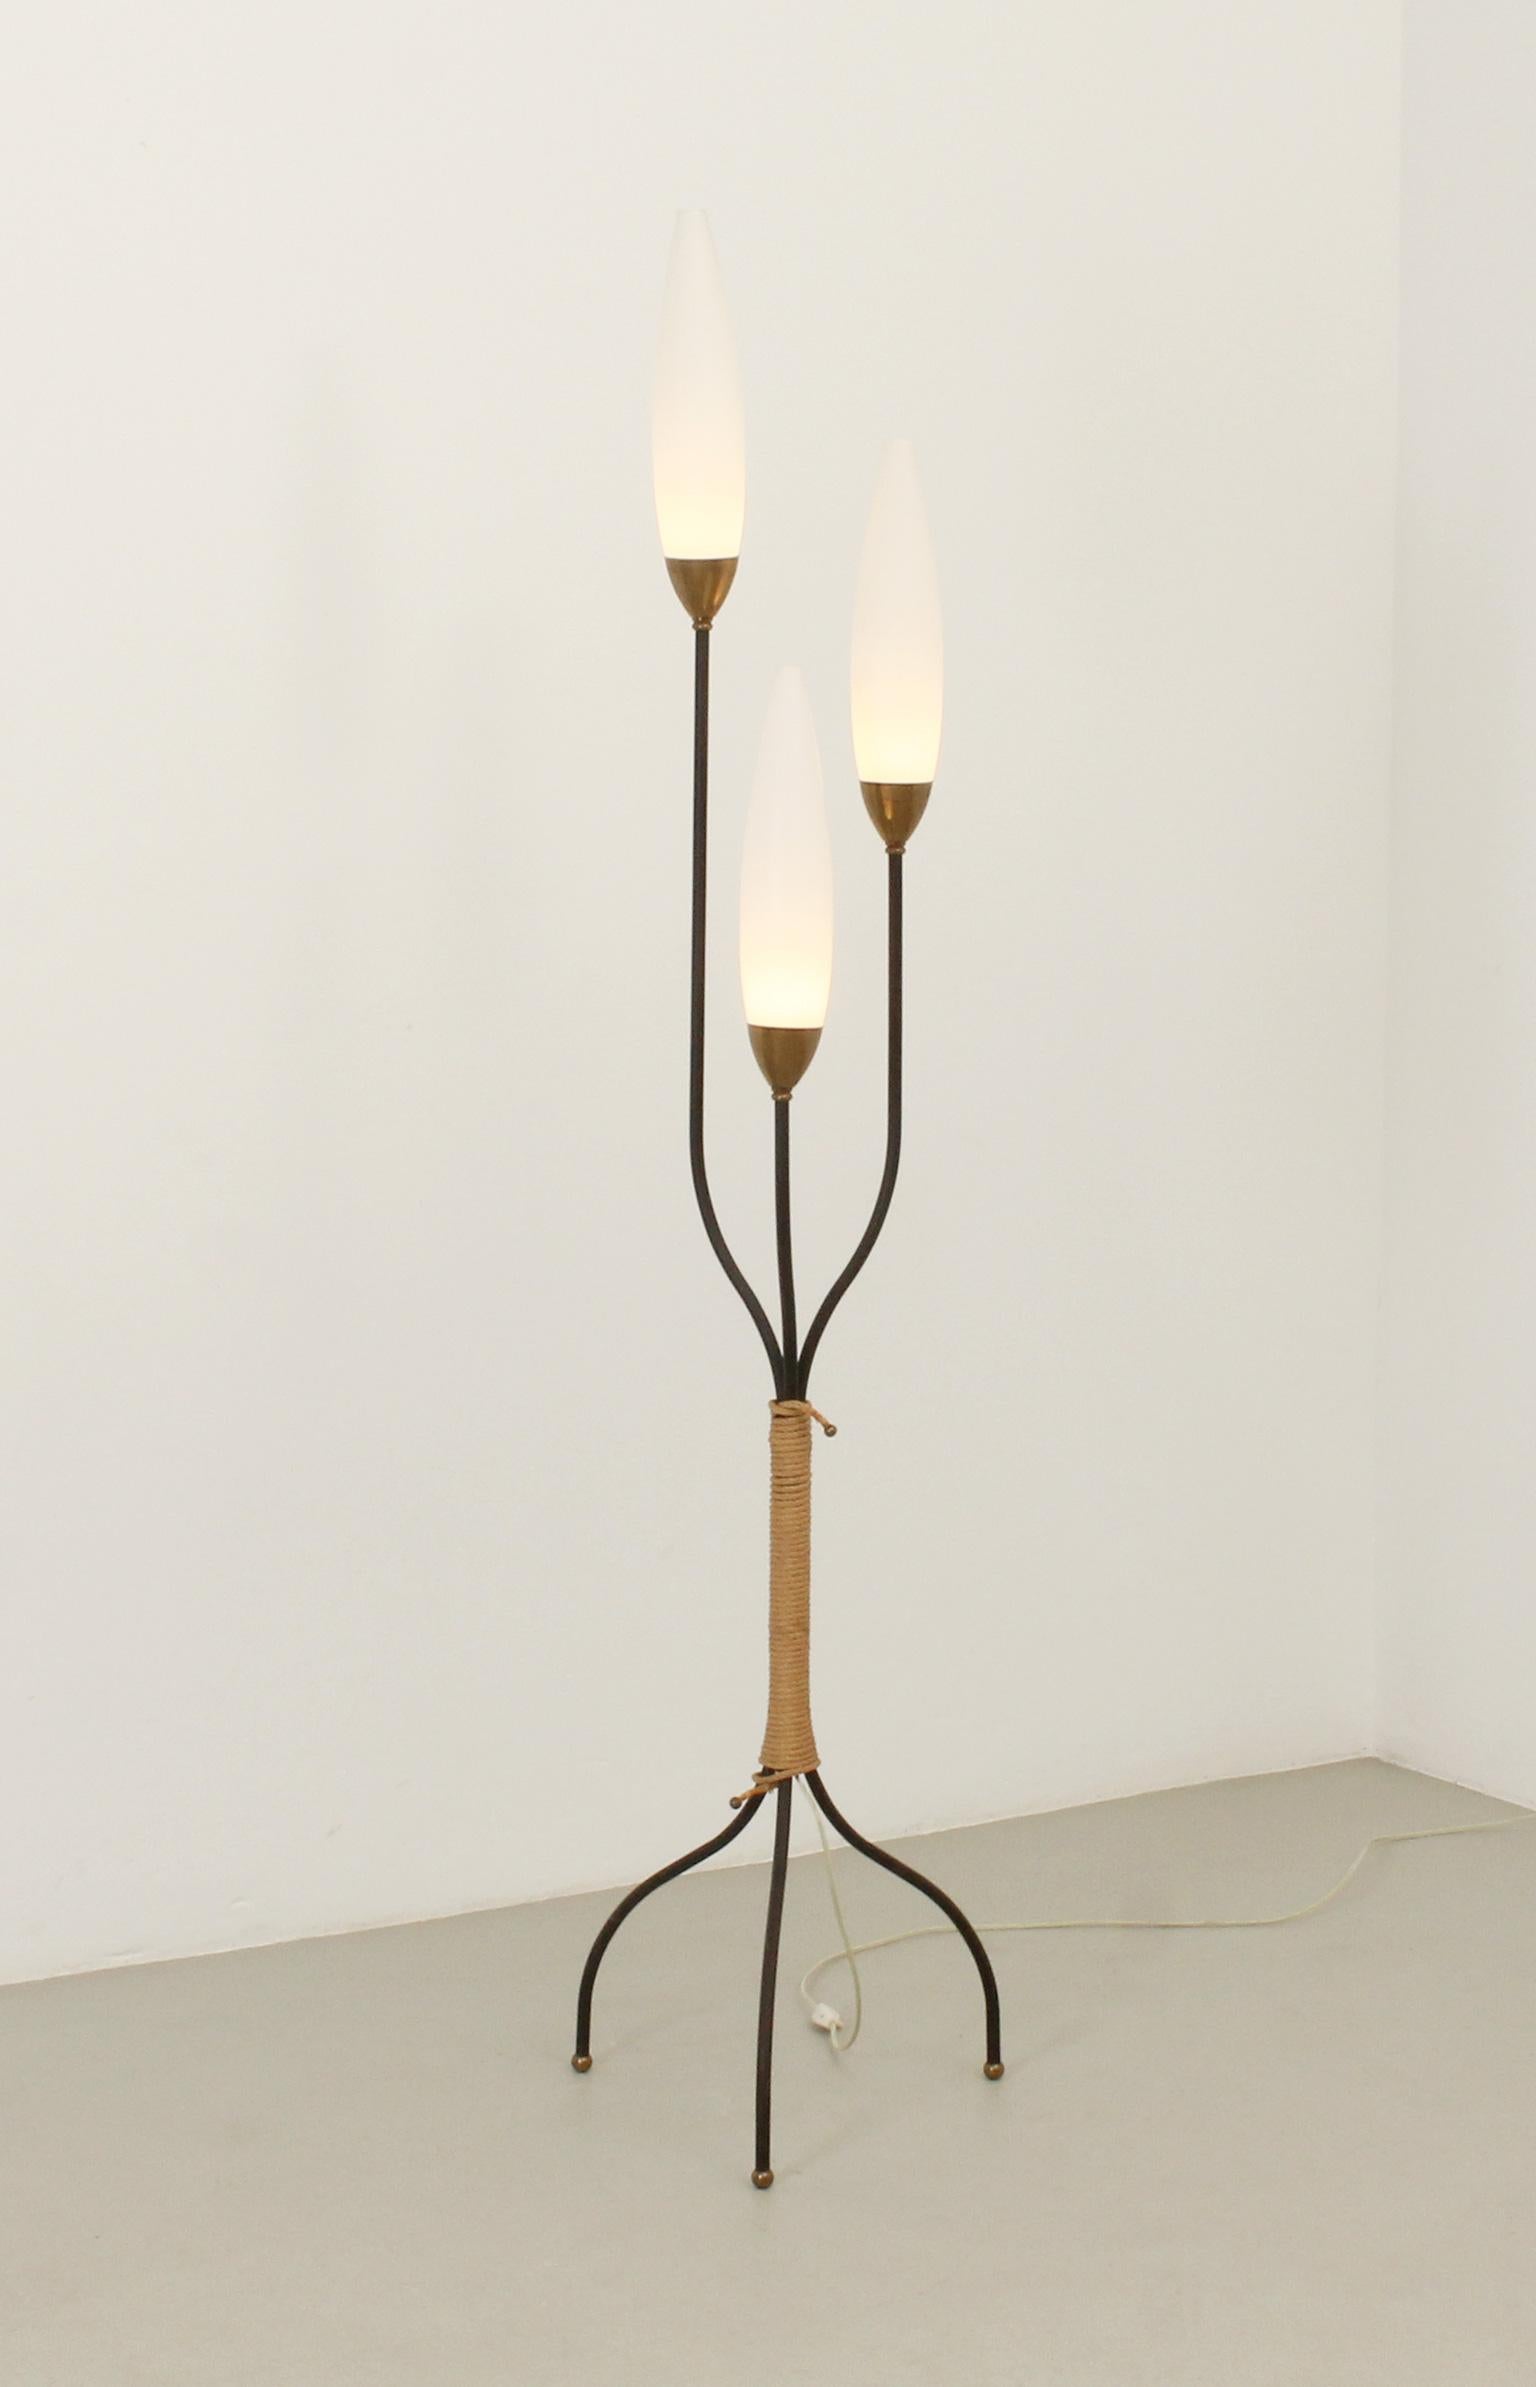 Floor tripod lamp with three lights by Maison Lunel, France, 1950s. Black lacquered metal with three opal glass diffusers and fittings in brass and cord.